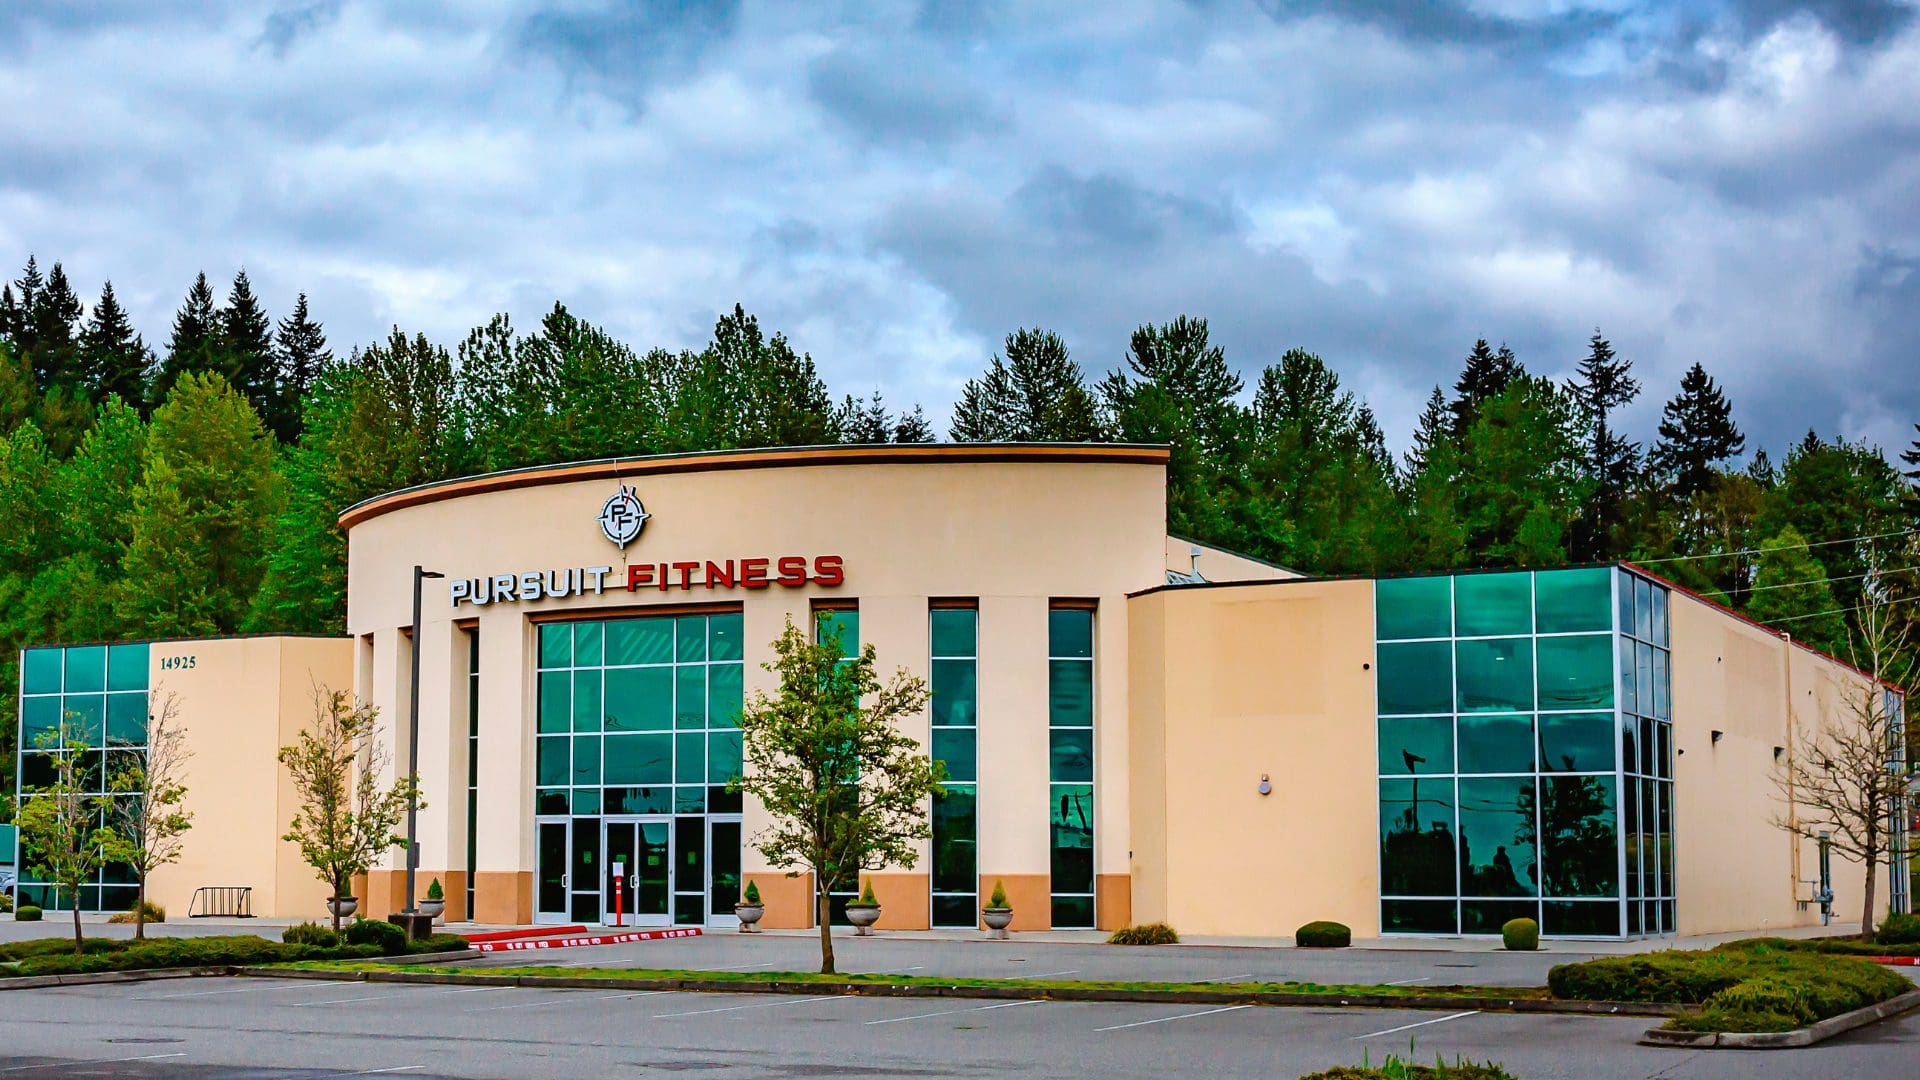 Learn More About the Best Gym Amenities in Arlington and Monroe, WA